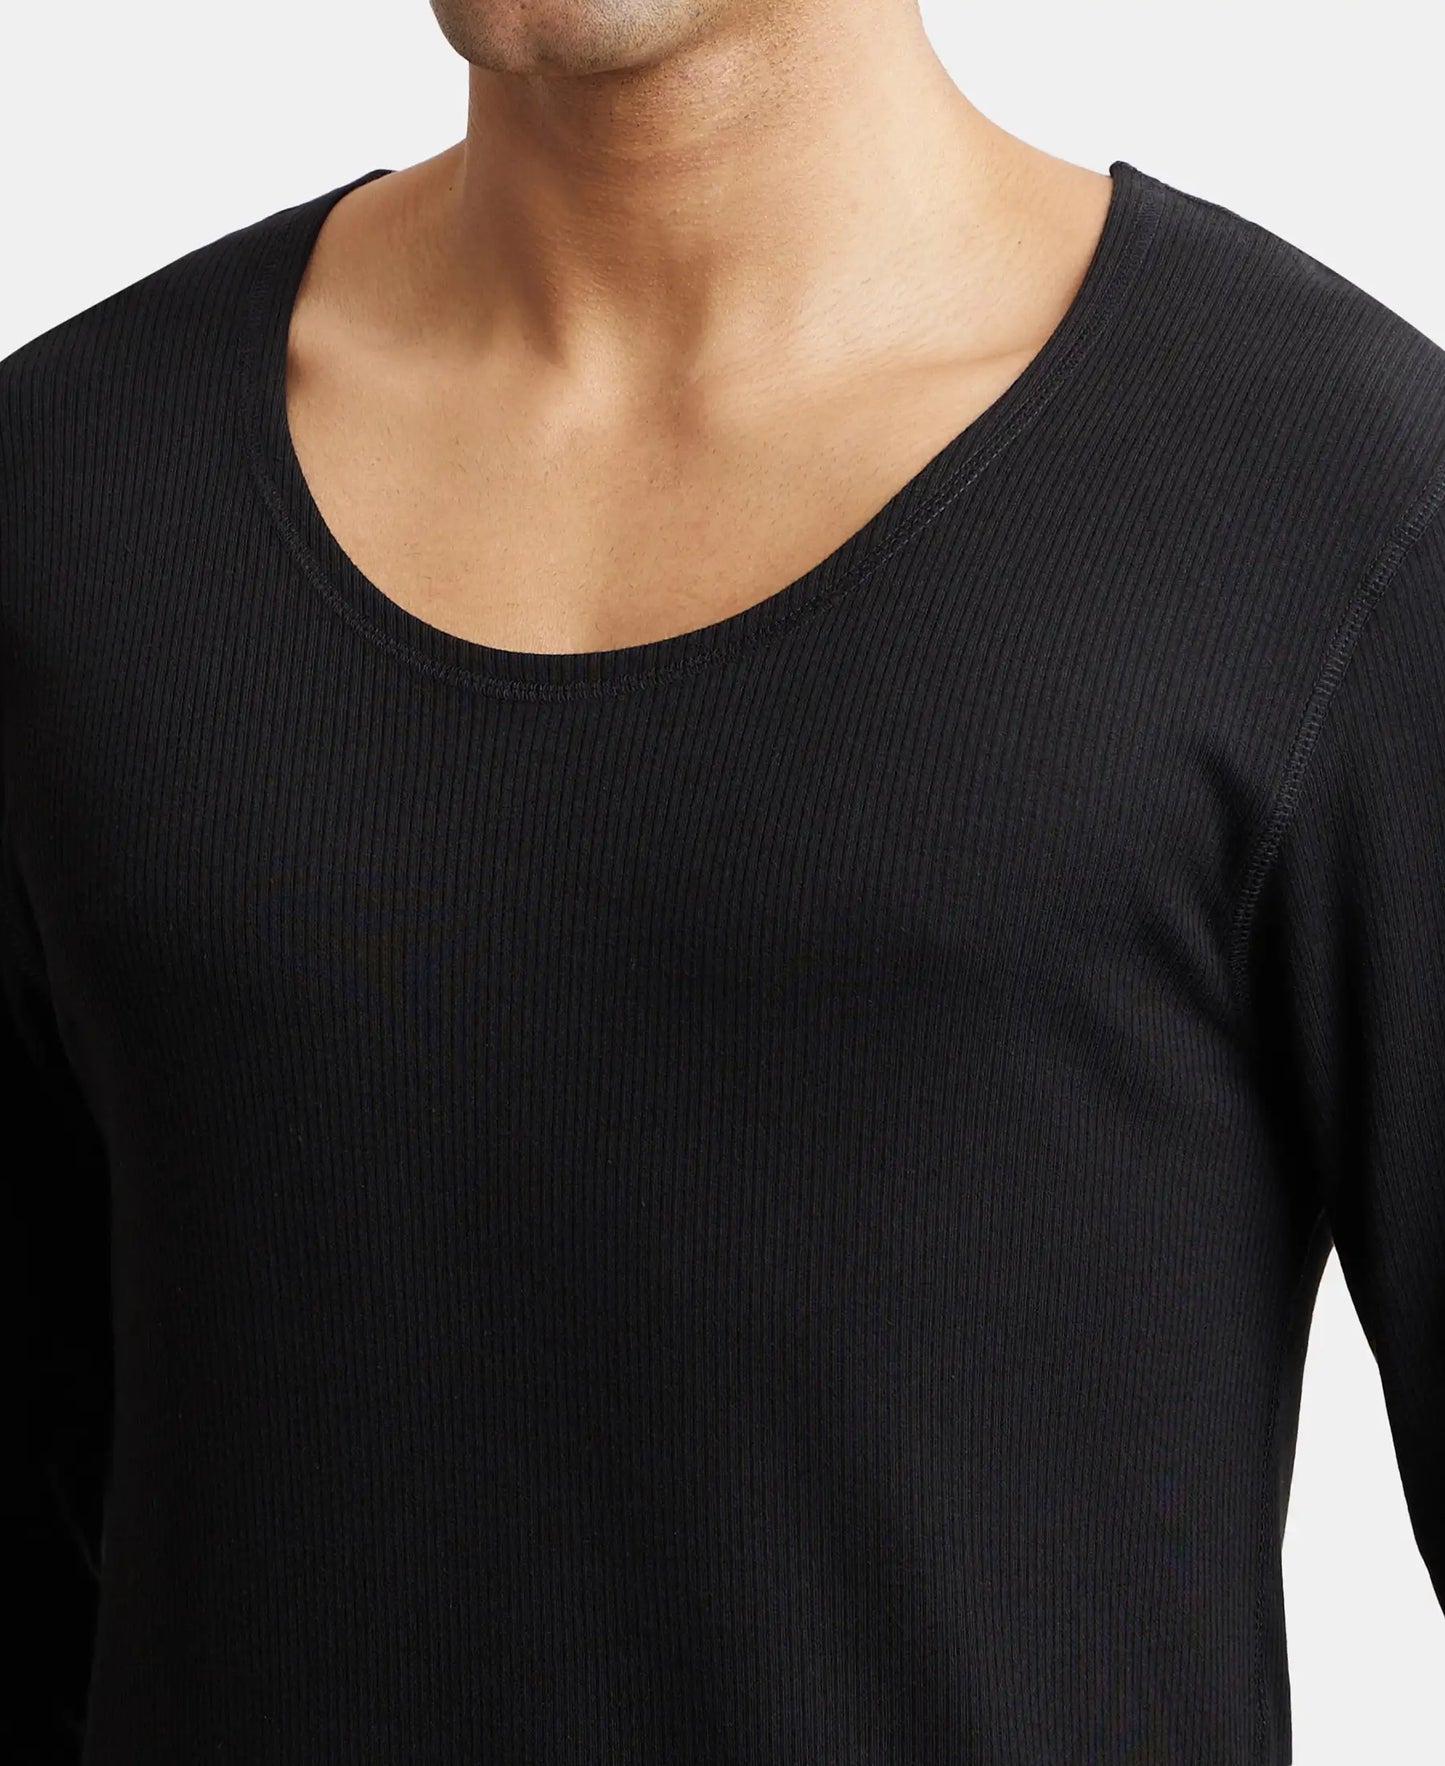 Super Combed Cotton Rich Full Sleeve Thermal Undershirt with StayWarm Technology - Black-6